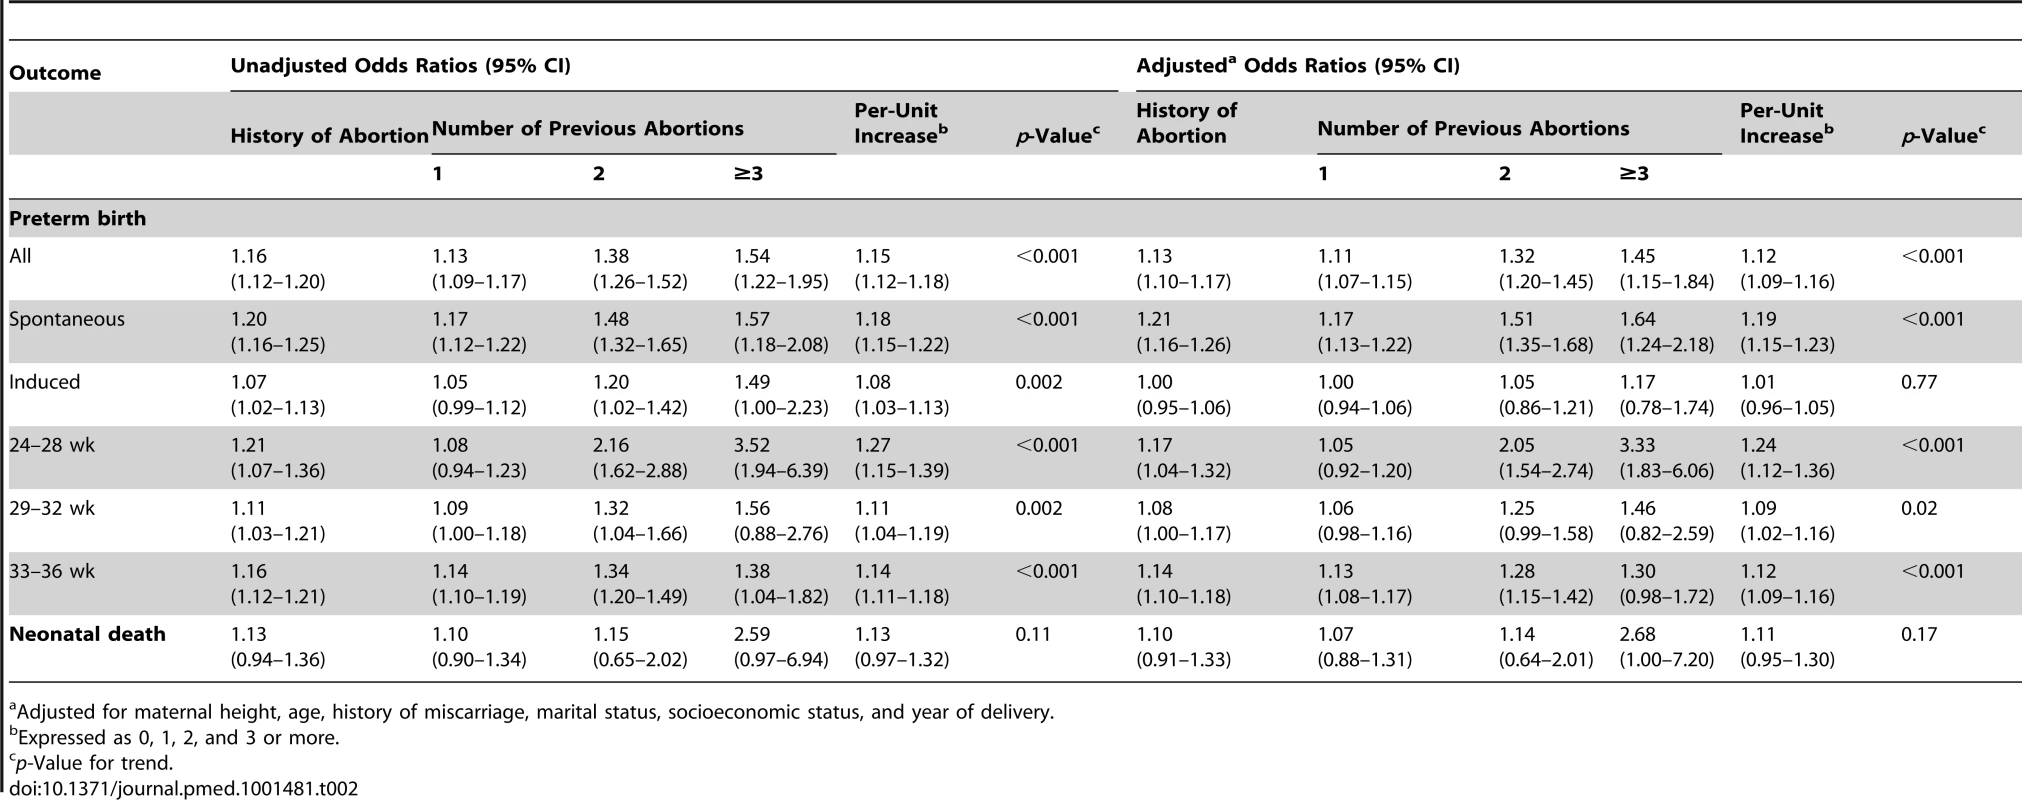 Logistic regression analysis of the association between previous abortion and the risk of preterm birth and neonatal death.